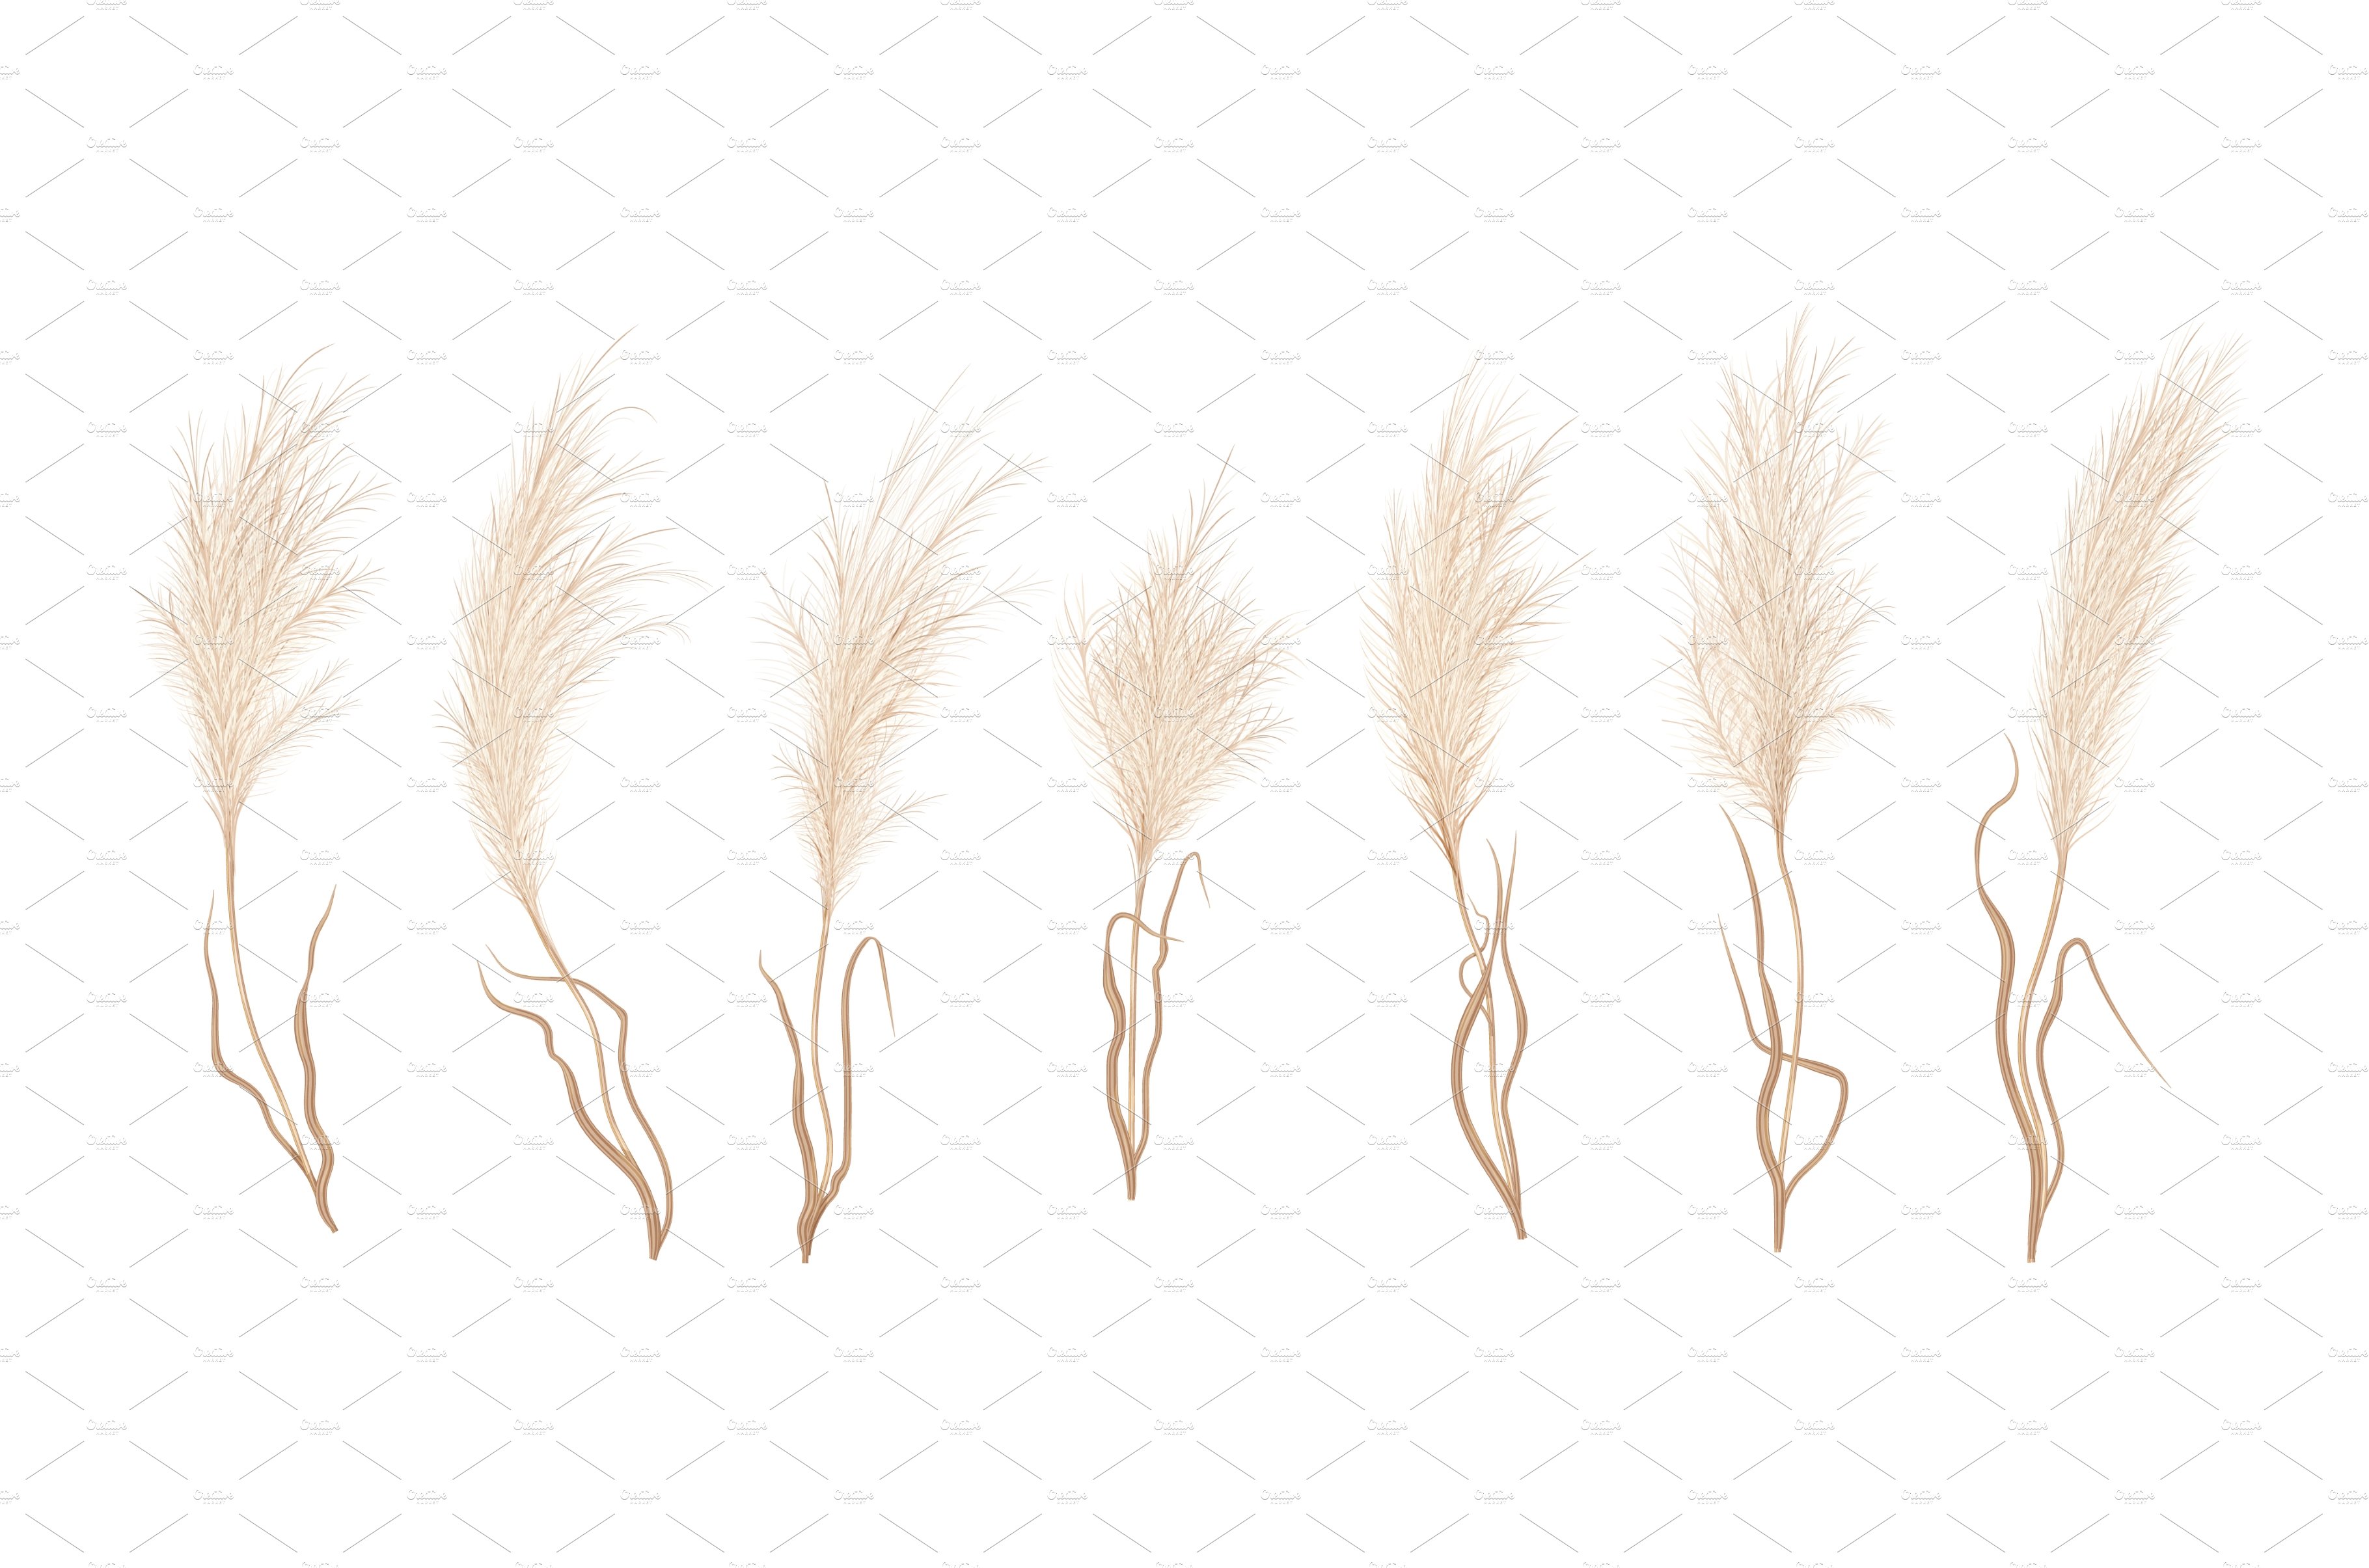 Row of dry grass on a white background.